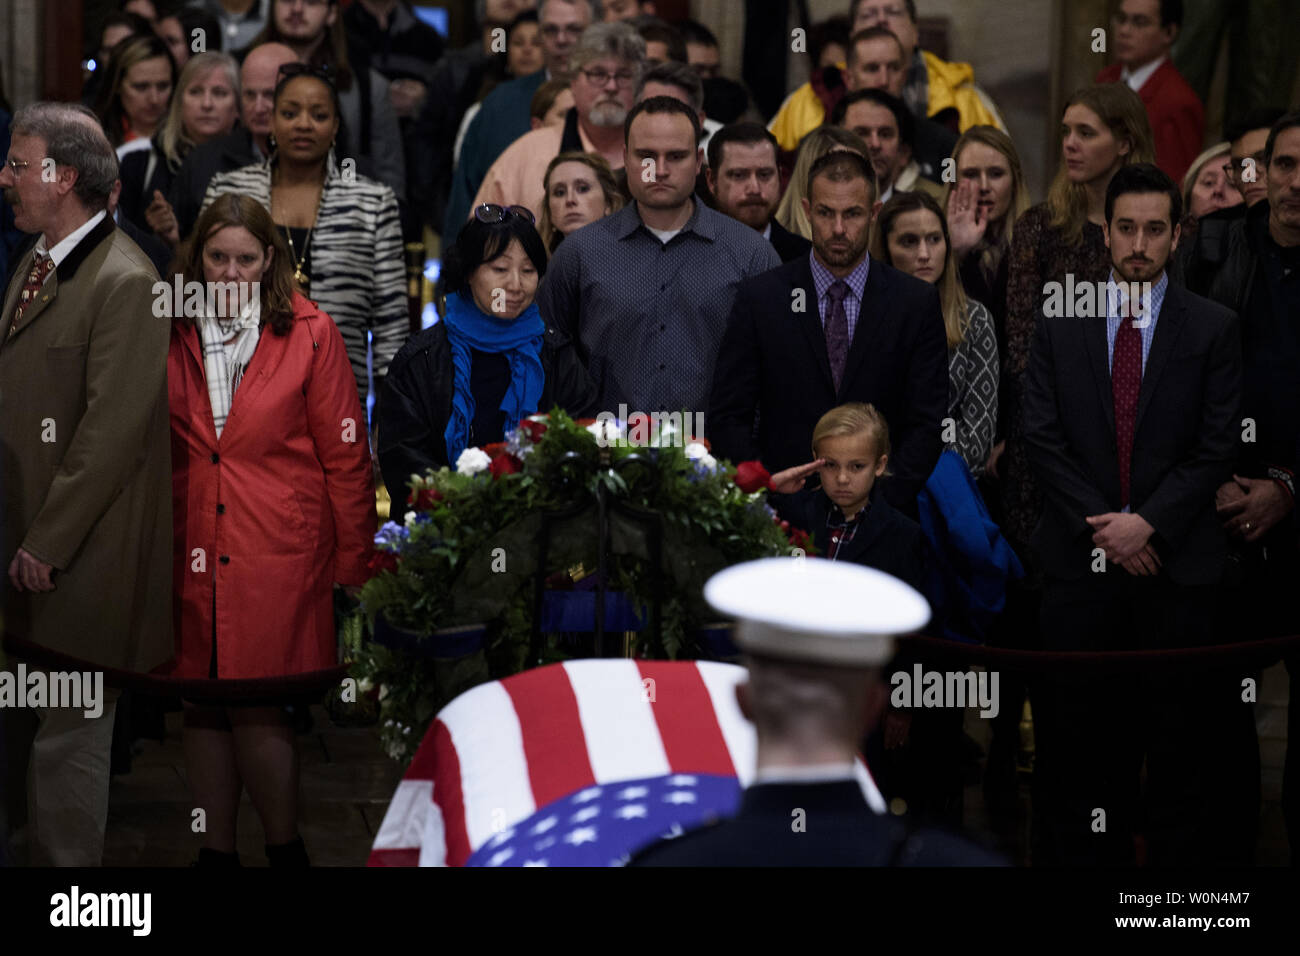 Stephen G. Leighton Jr. salutes while paying respects with his father  Stephen G. Leighton Sr. as the remains of former US President George H. W. Bush lie in state in the US Capitol's rotunda December 3, 2018 in Washington, DC.     Photo by Brendan Smialowski/UPI Stock Photo